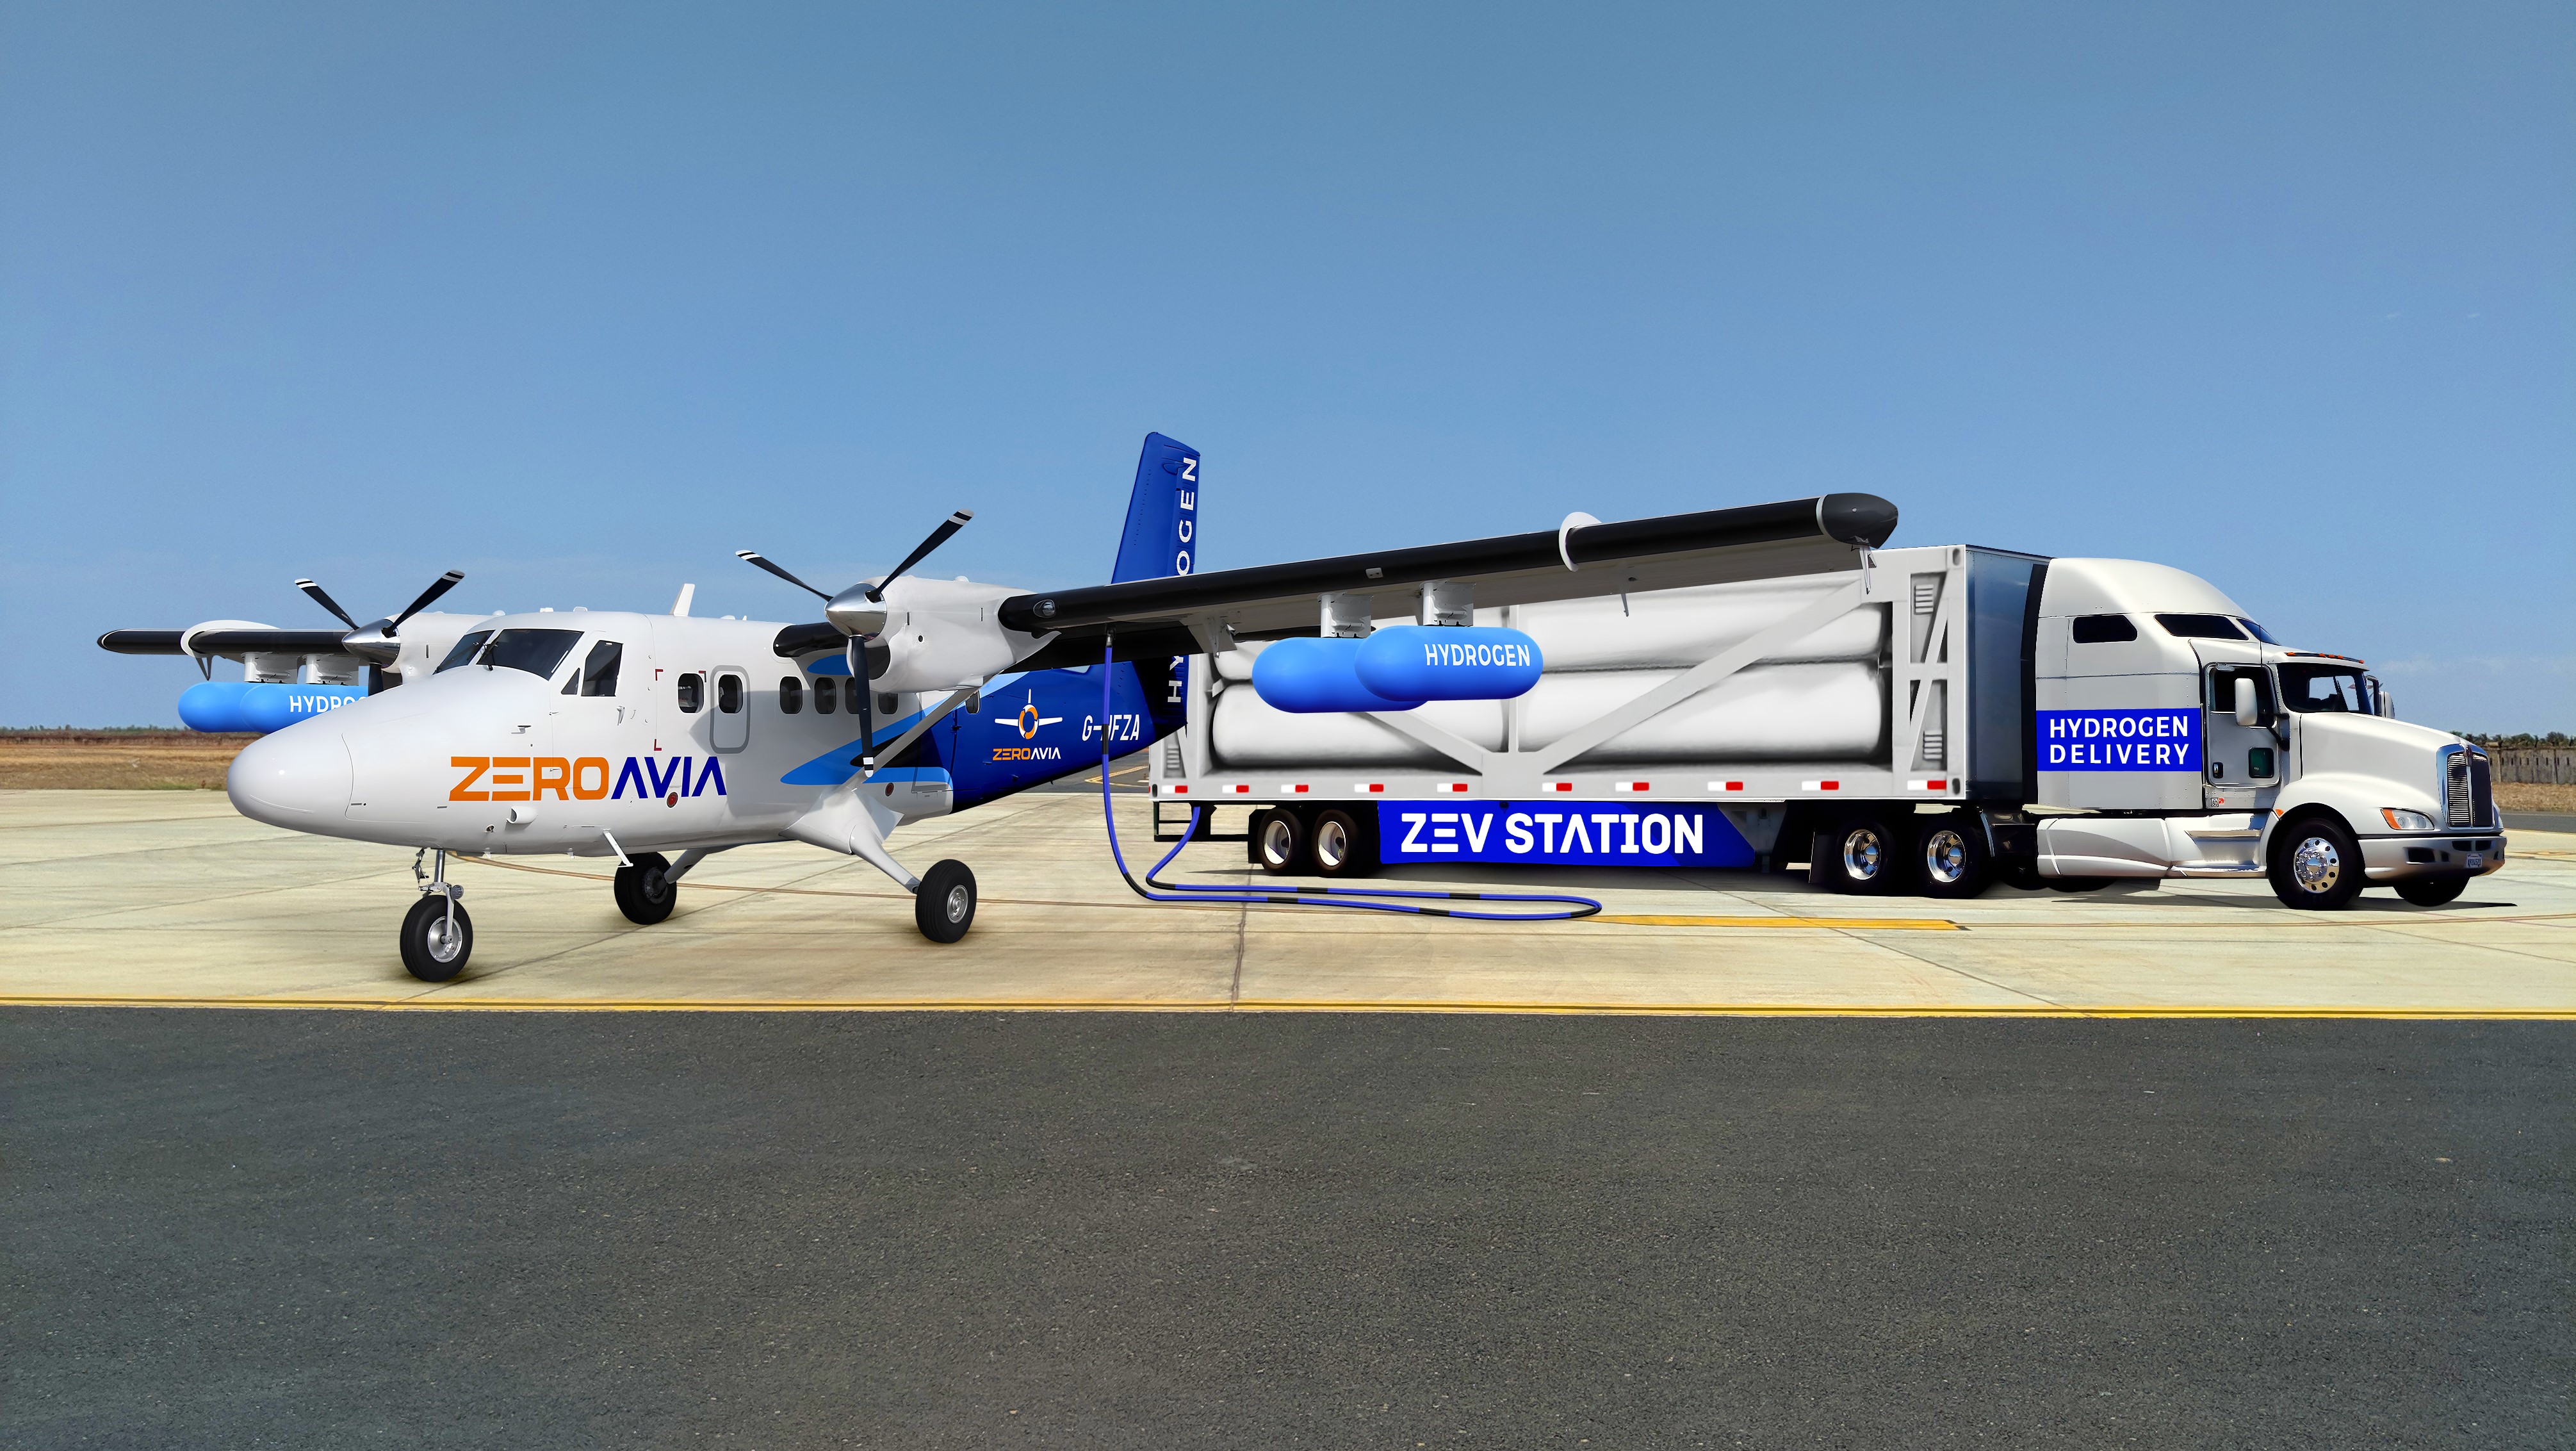 ZeroAvia signed a memorandum of understanding with ZEV Station to develop green hydrogen refueling stations at airports in California.